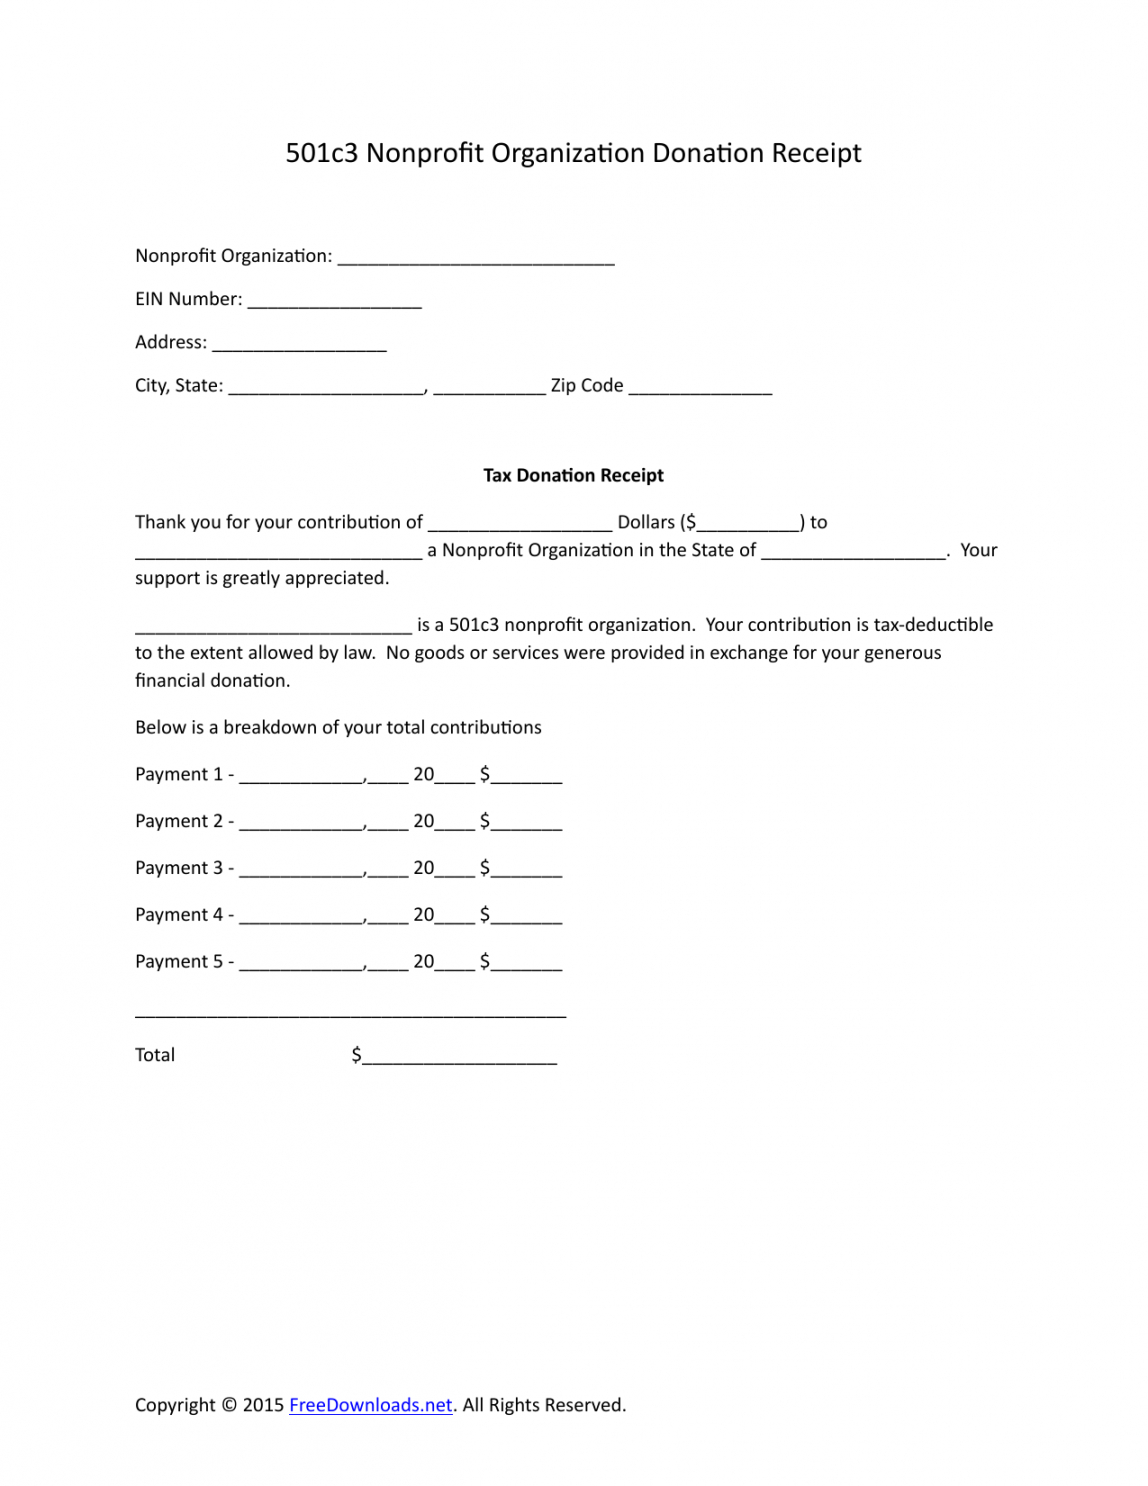 free download 501c3 donation receipt letter for tax purposes tax receipt for donation template pdf